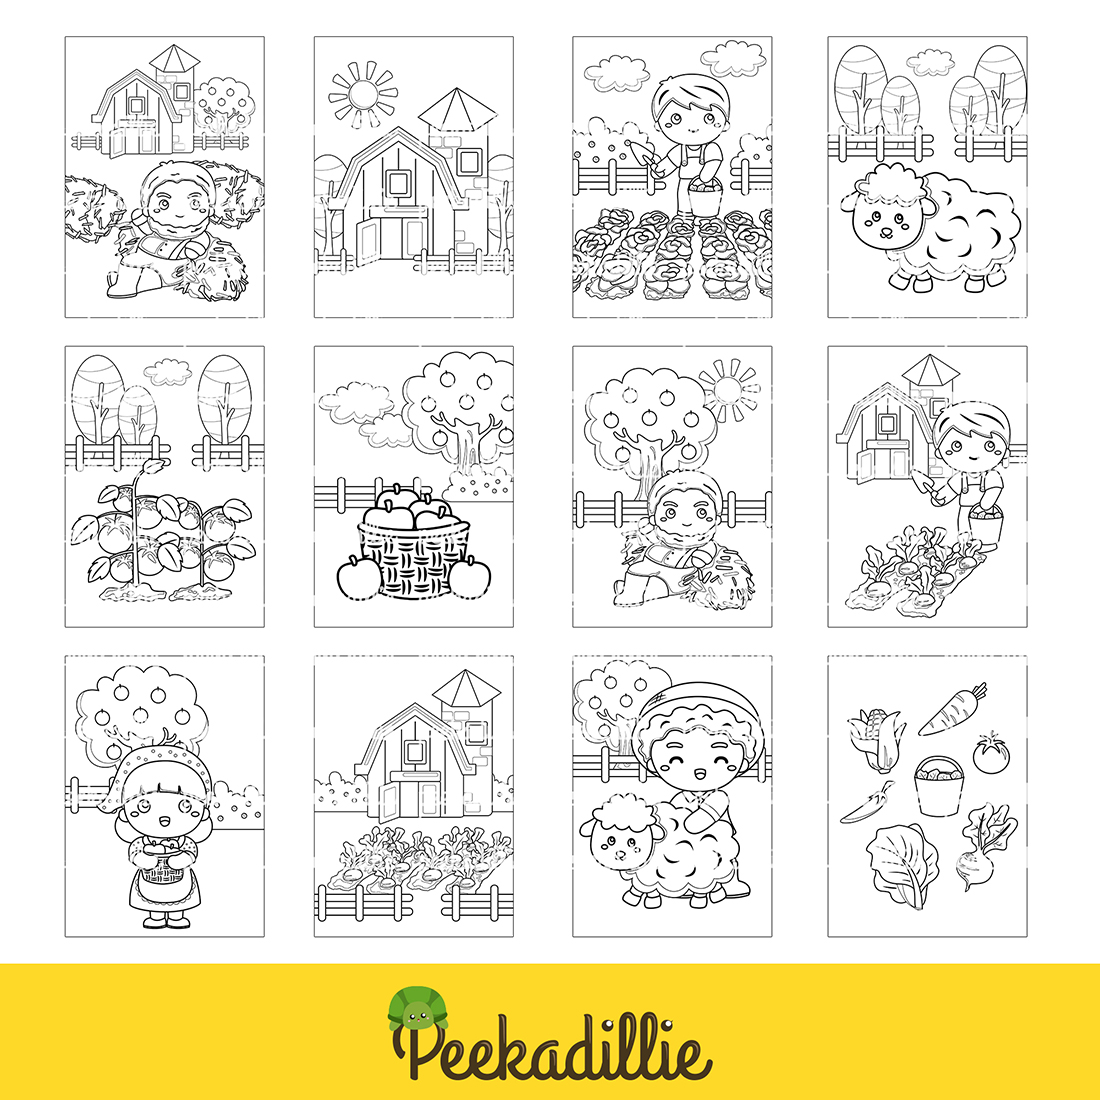 Fun Farm Life Activity with Kids Farmer Family and Animals Coloring Pages Set preview image.